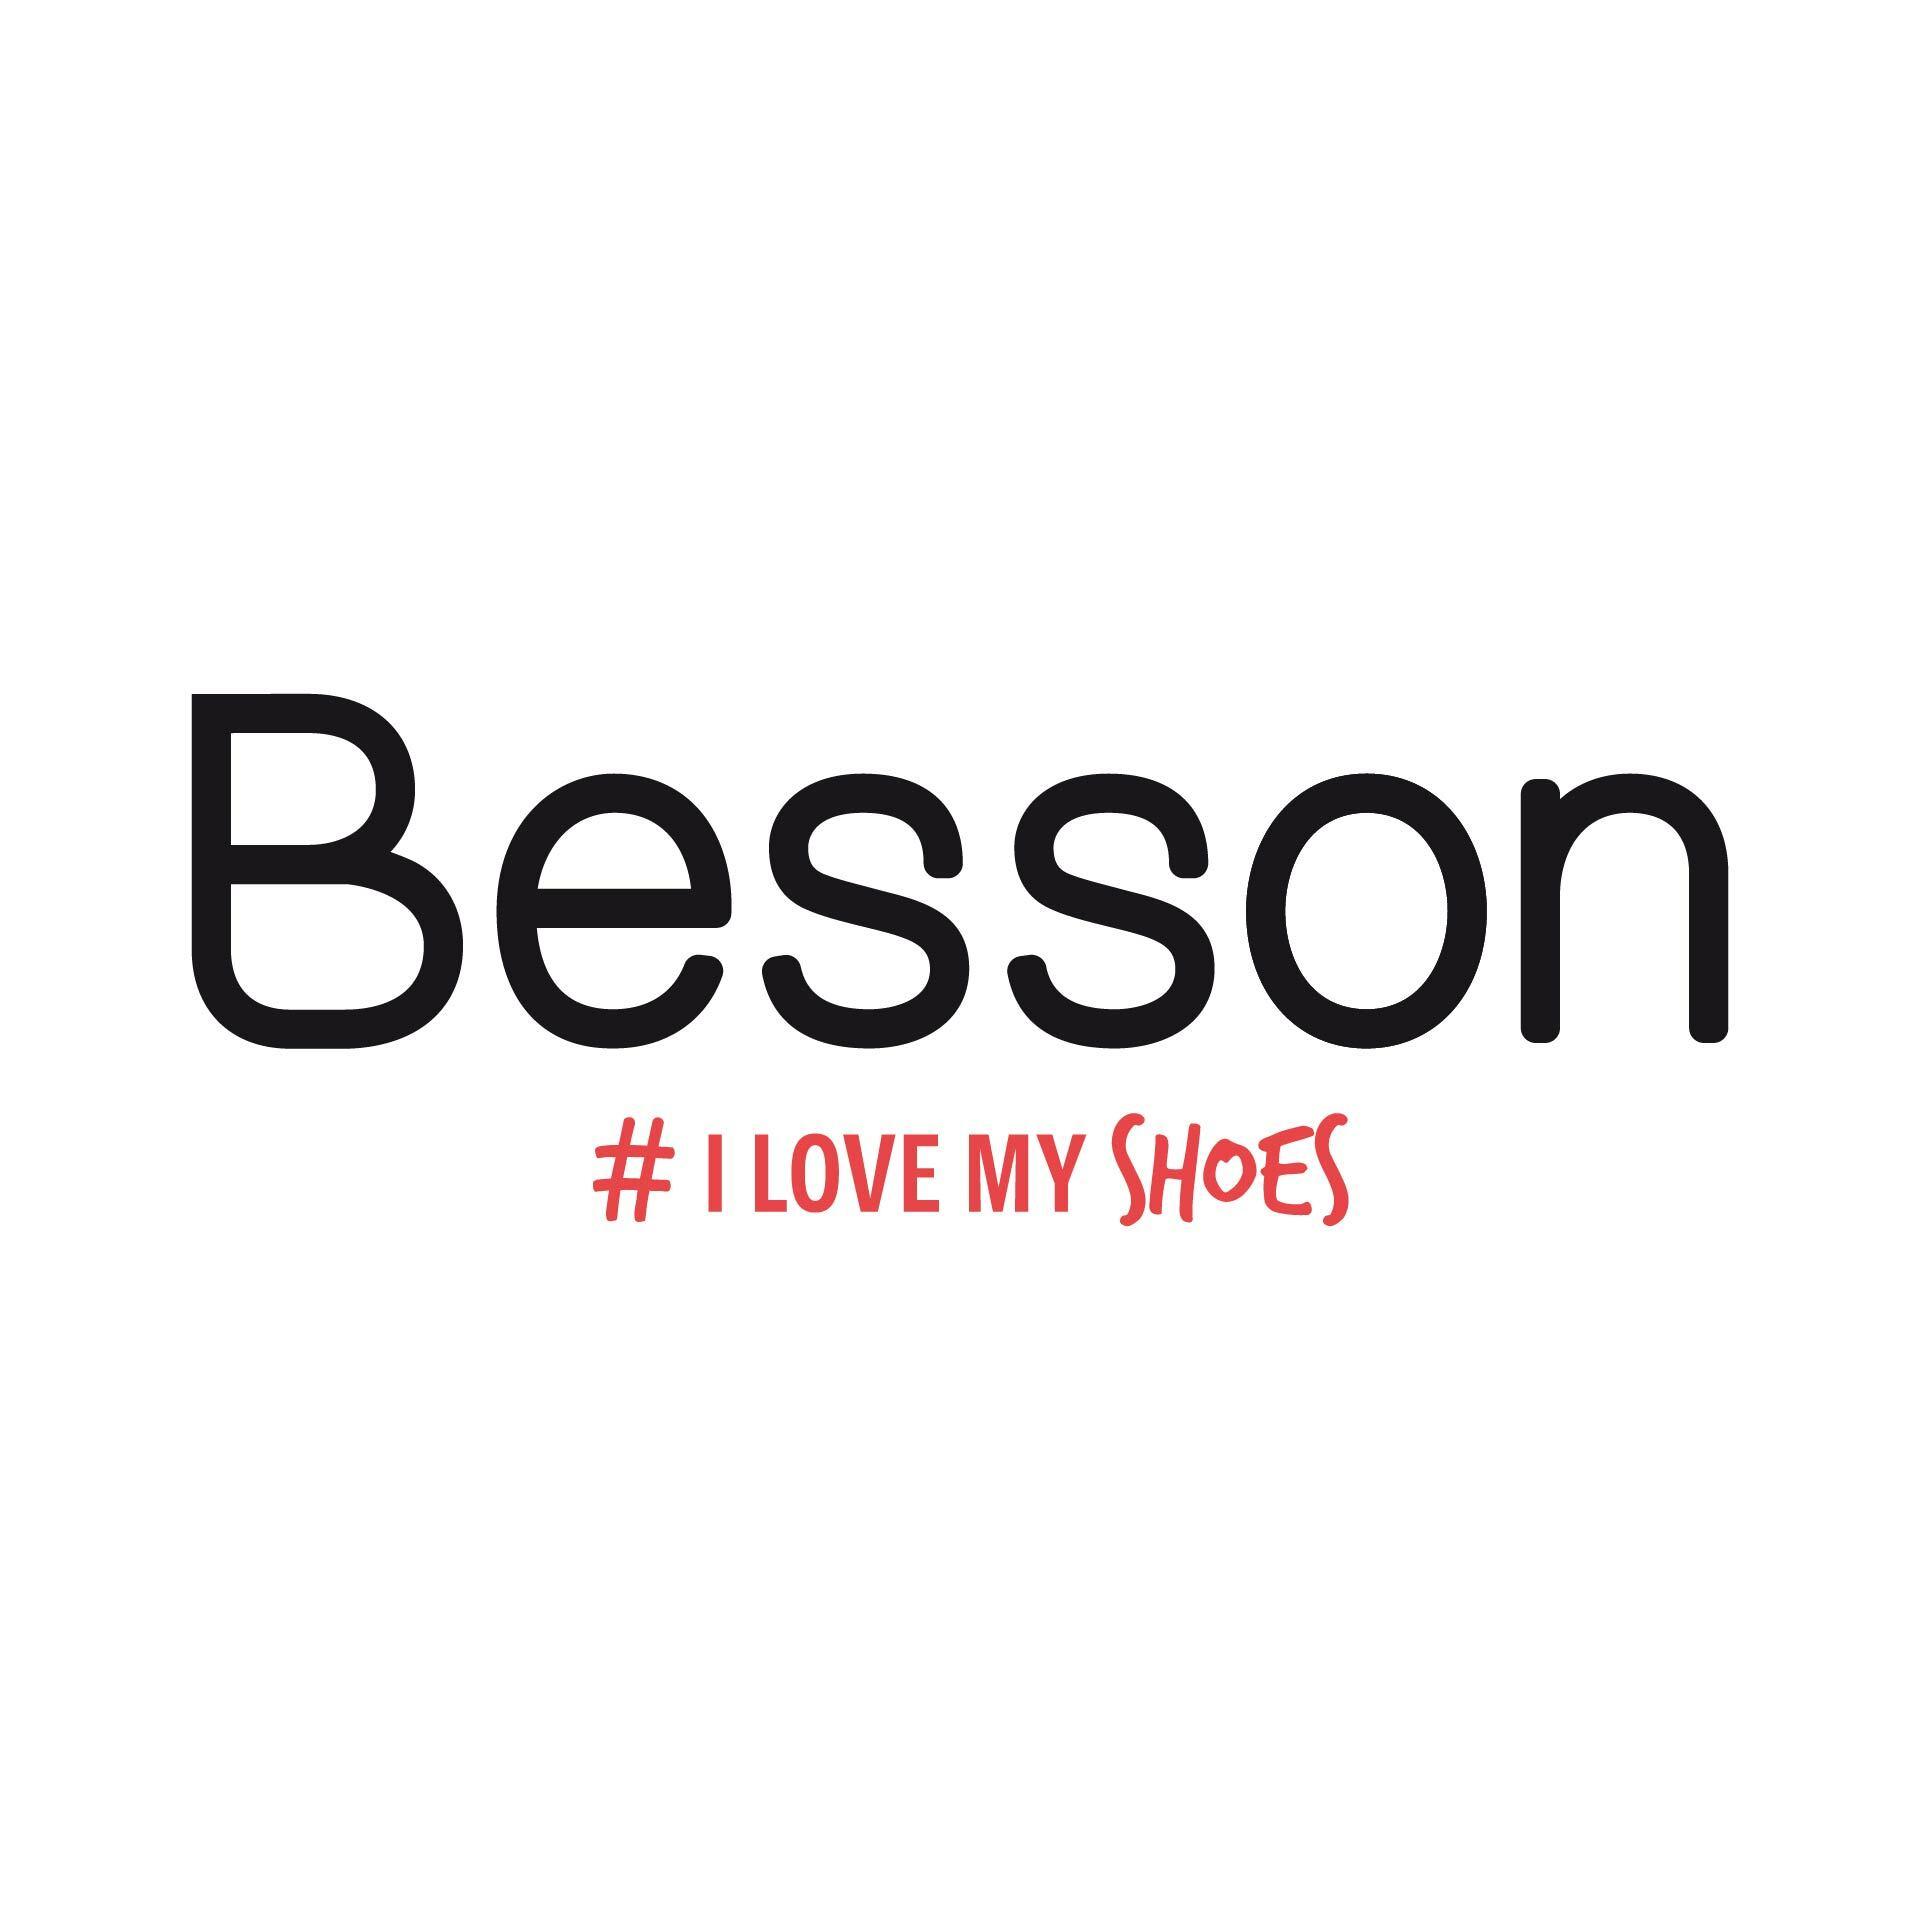 Besson Chaussures Angouleme Champniers